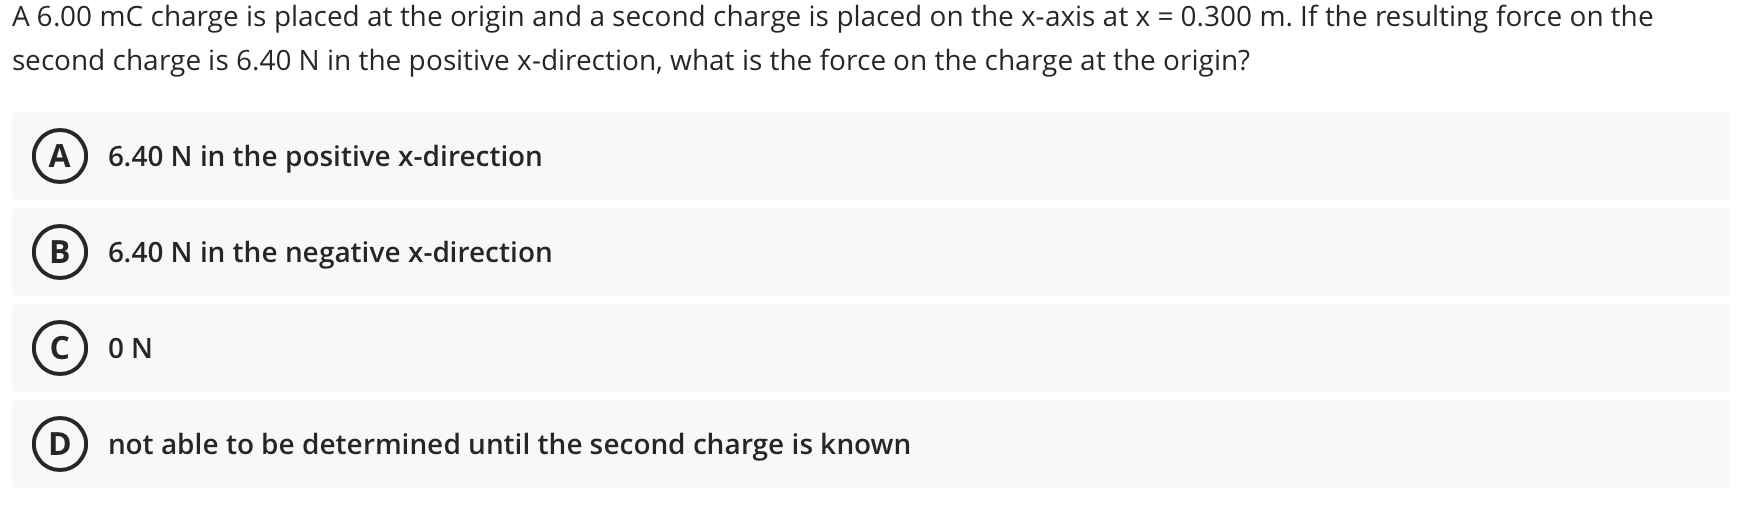 A 6.00 mC charge is placed at the origin and a second charge is placed on the x-axis at x = 0.300 m. If the resulting force on the
second charge is 6.40 N in the positive x-direction, what is the force on the charge at the origin?
A) 6.40 N in the positive x-direction
6.40 N in the negative x-direction
ON
not able to be determined until the second charge is known
